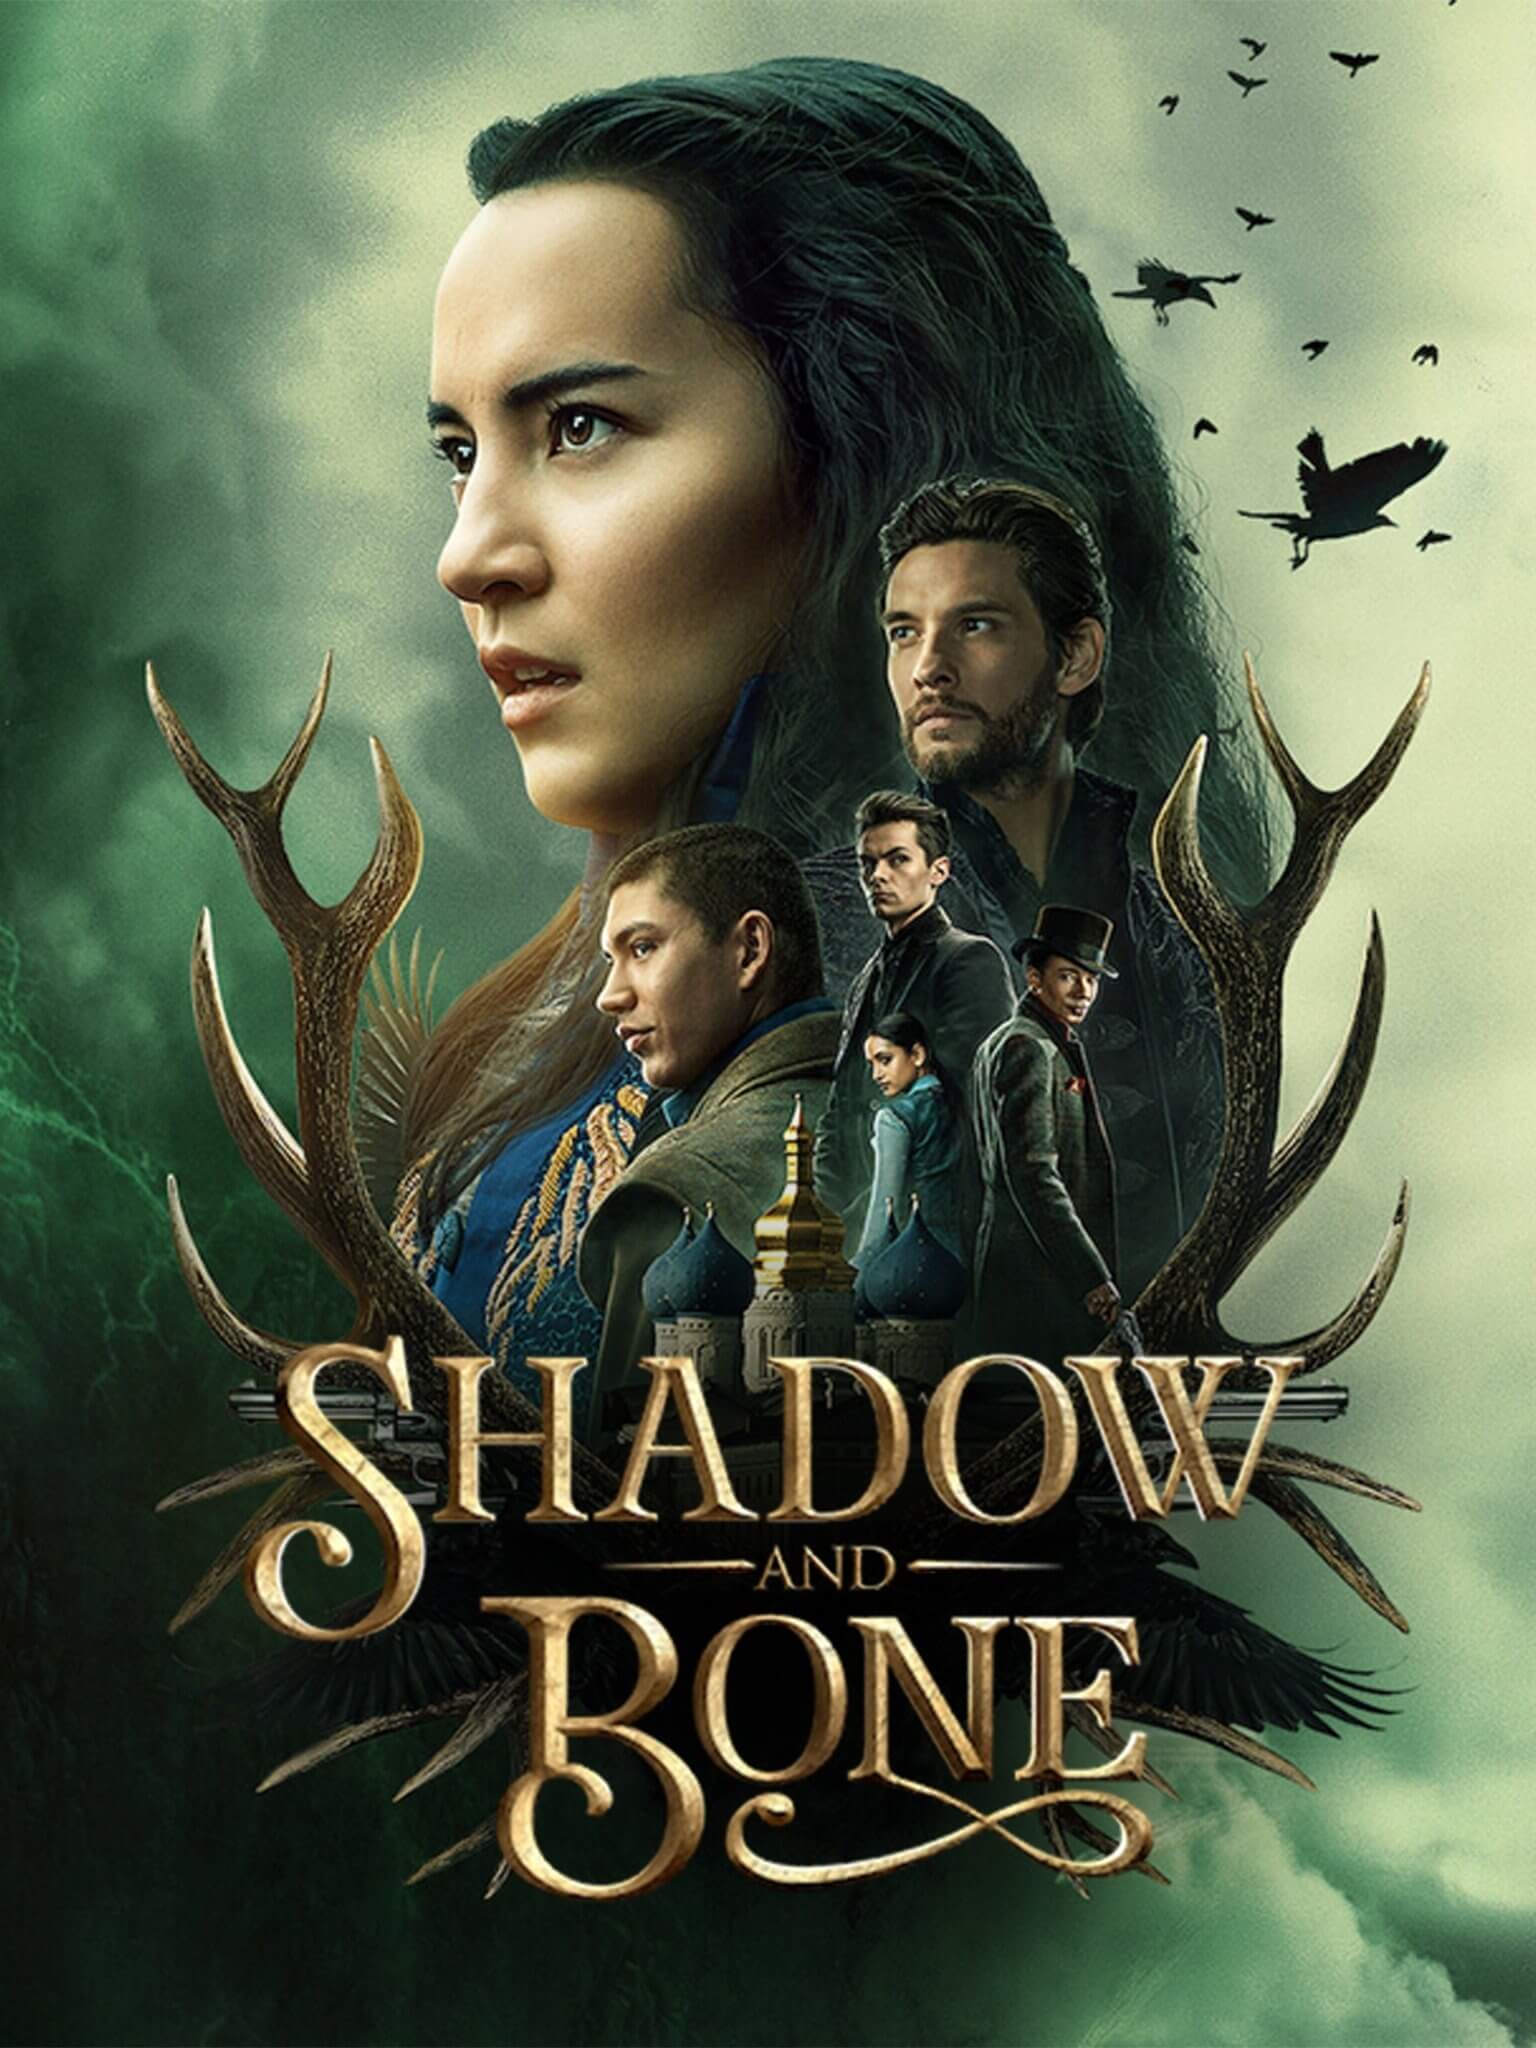 Is Shadow And Bone Based On A Book?